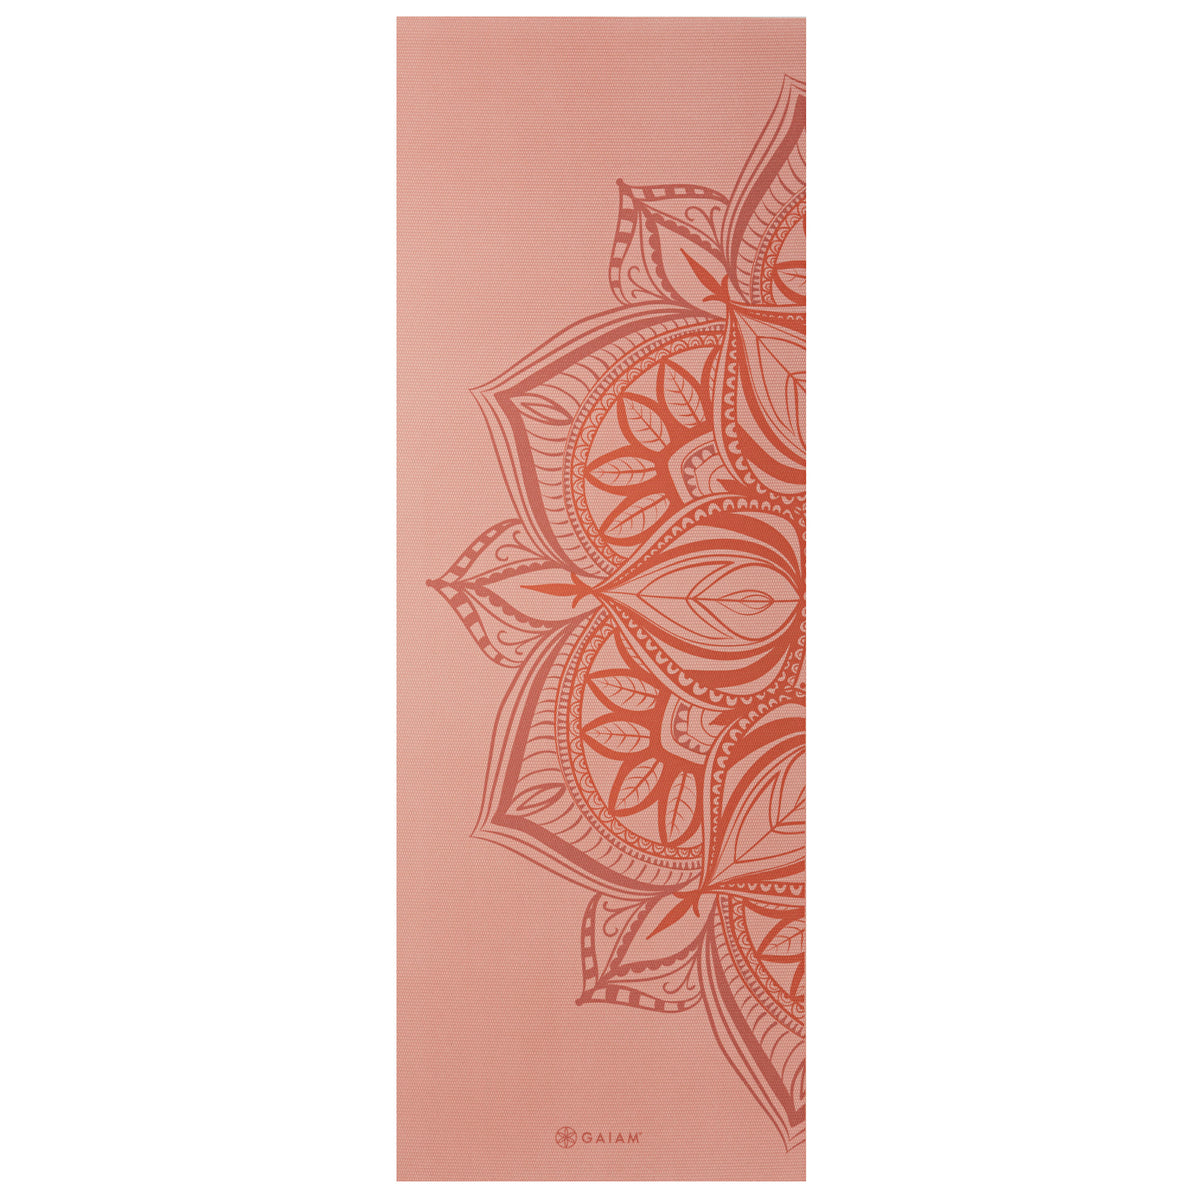 Gaiam Printed Point Yoga Mat (5mm) Sunset Point flat